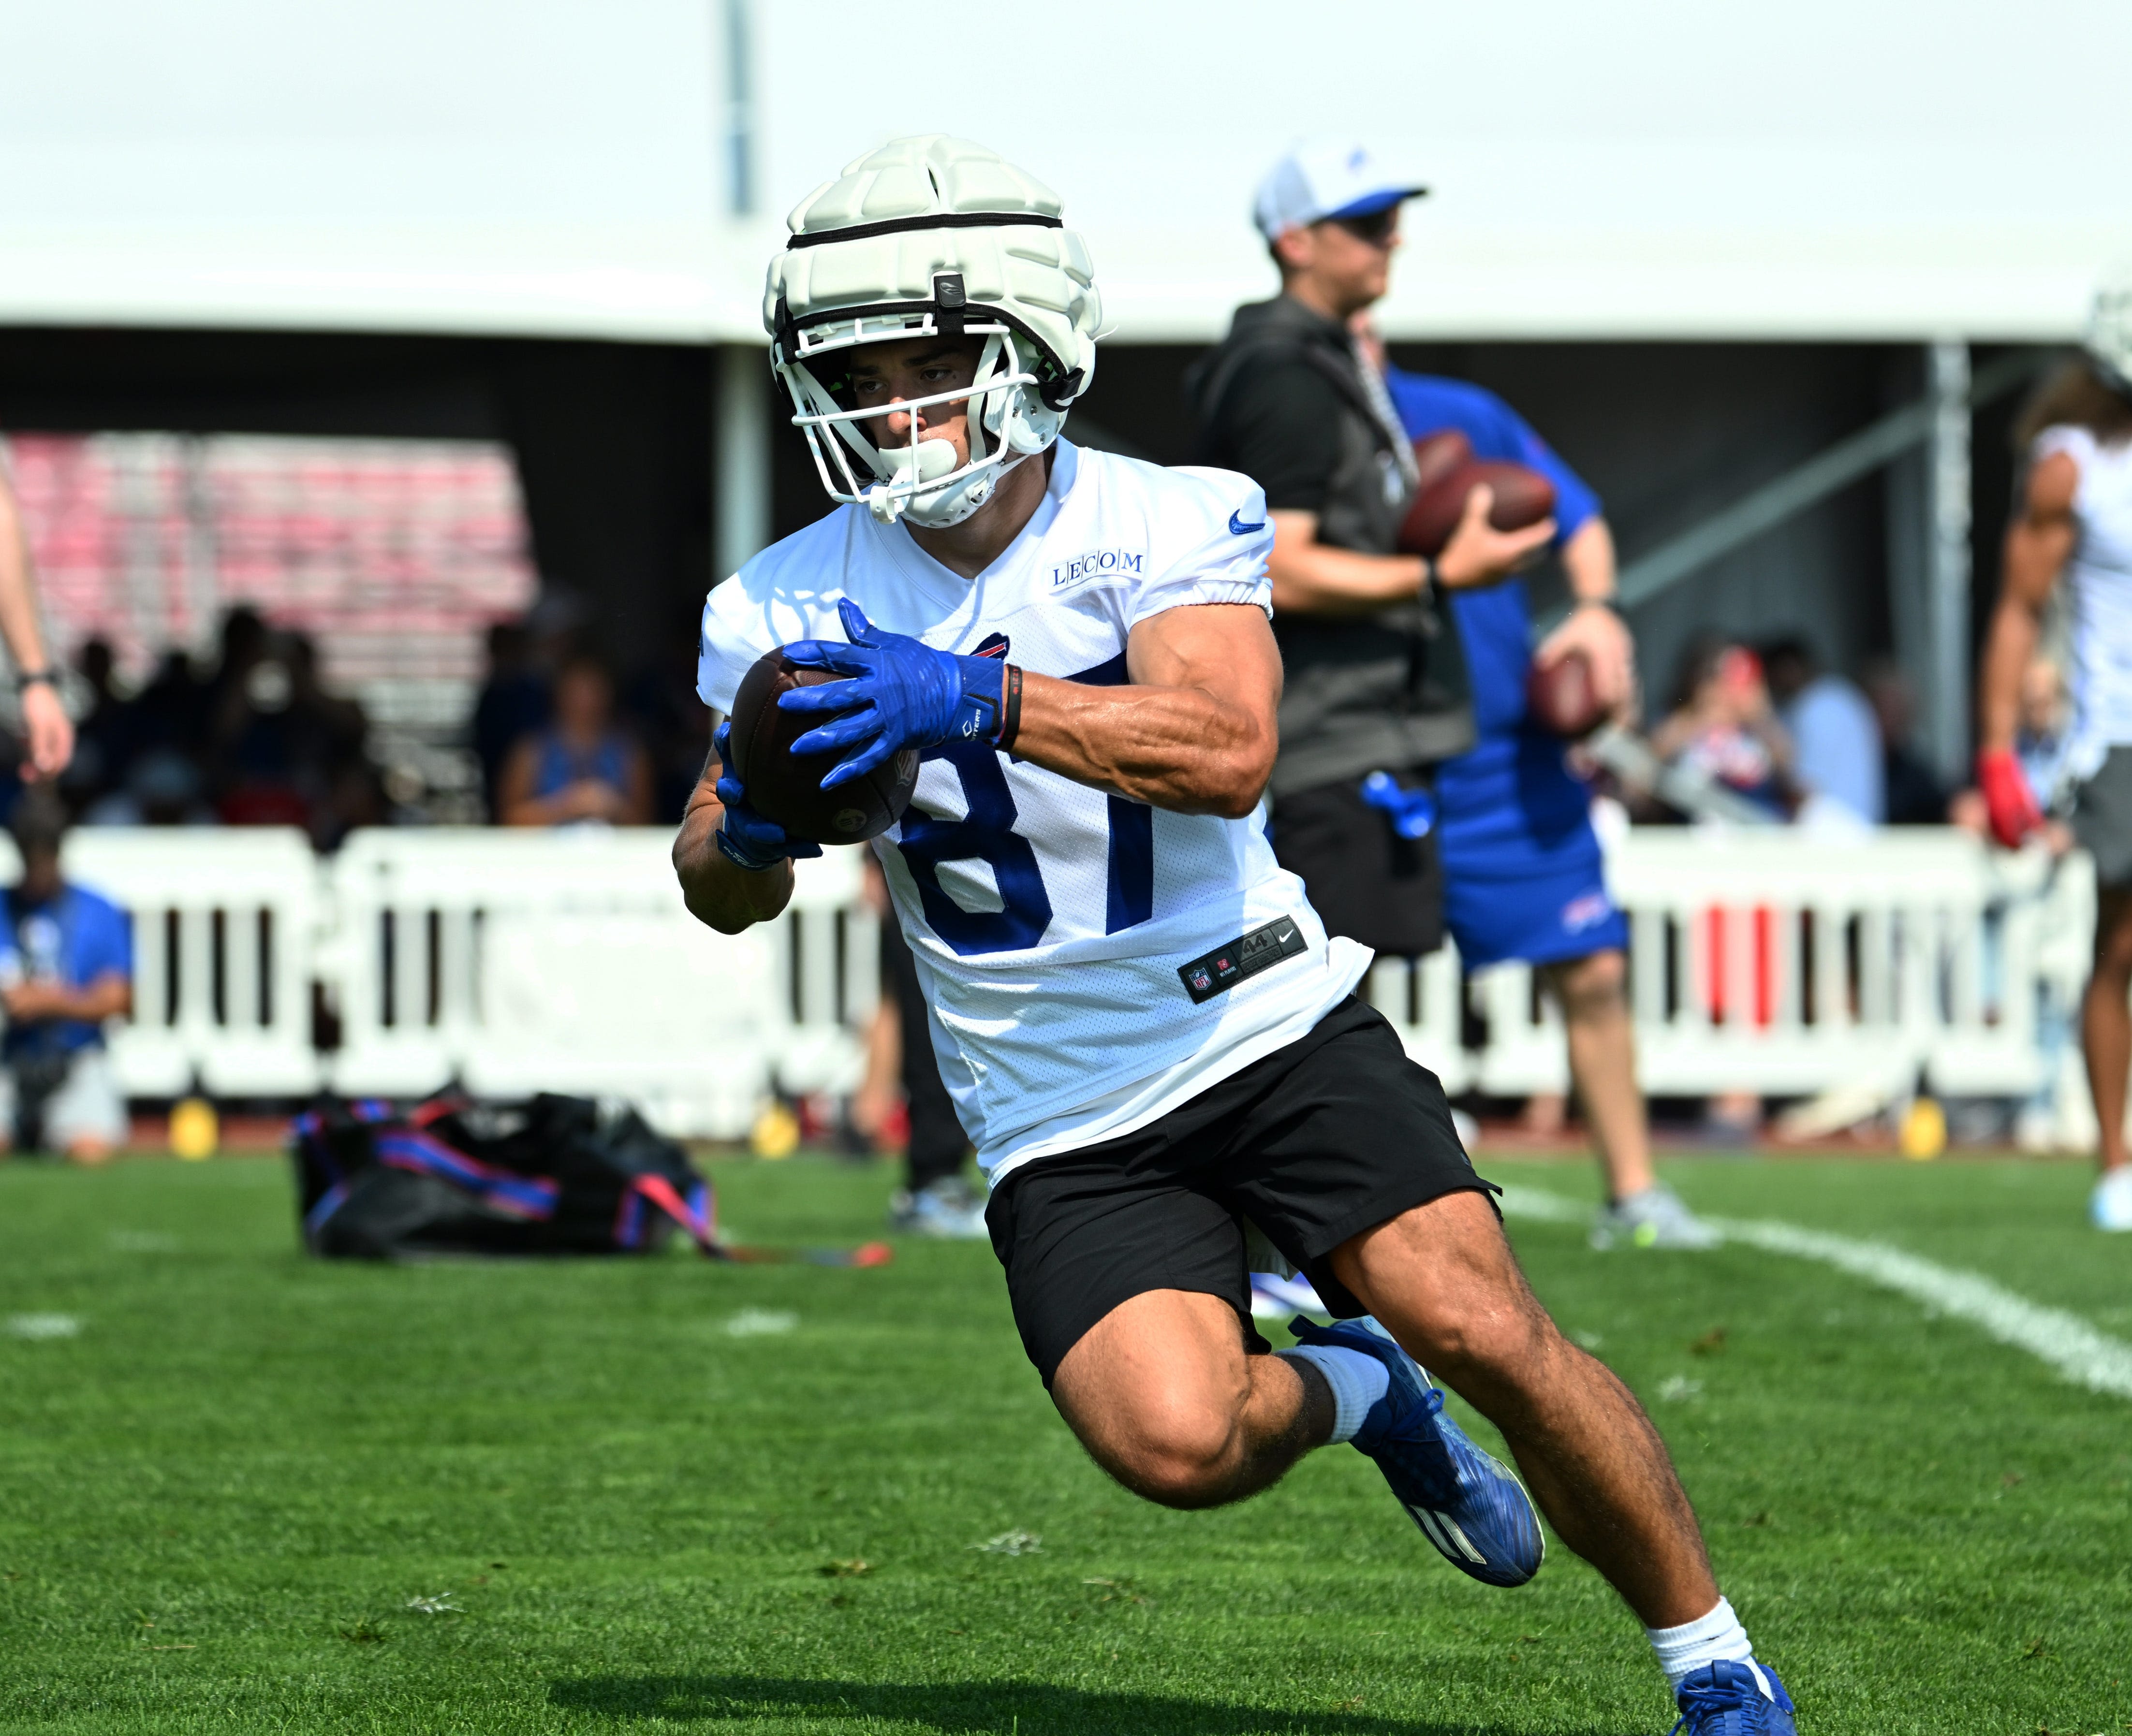 WR carted off at Bills practice leading to scuffle